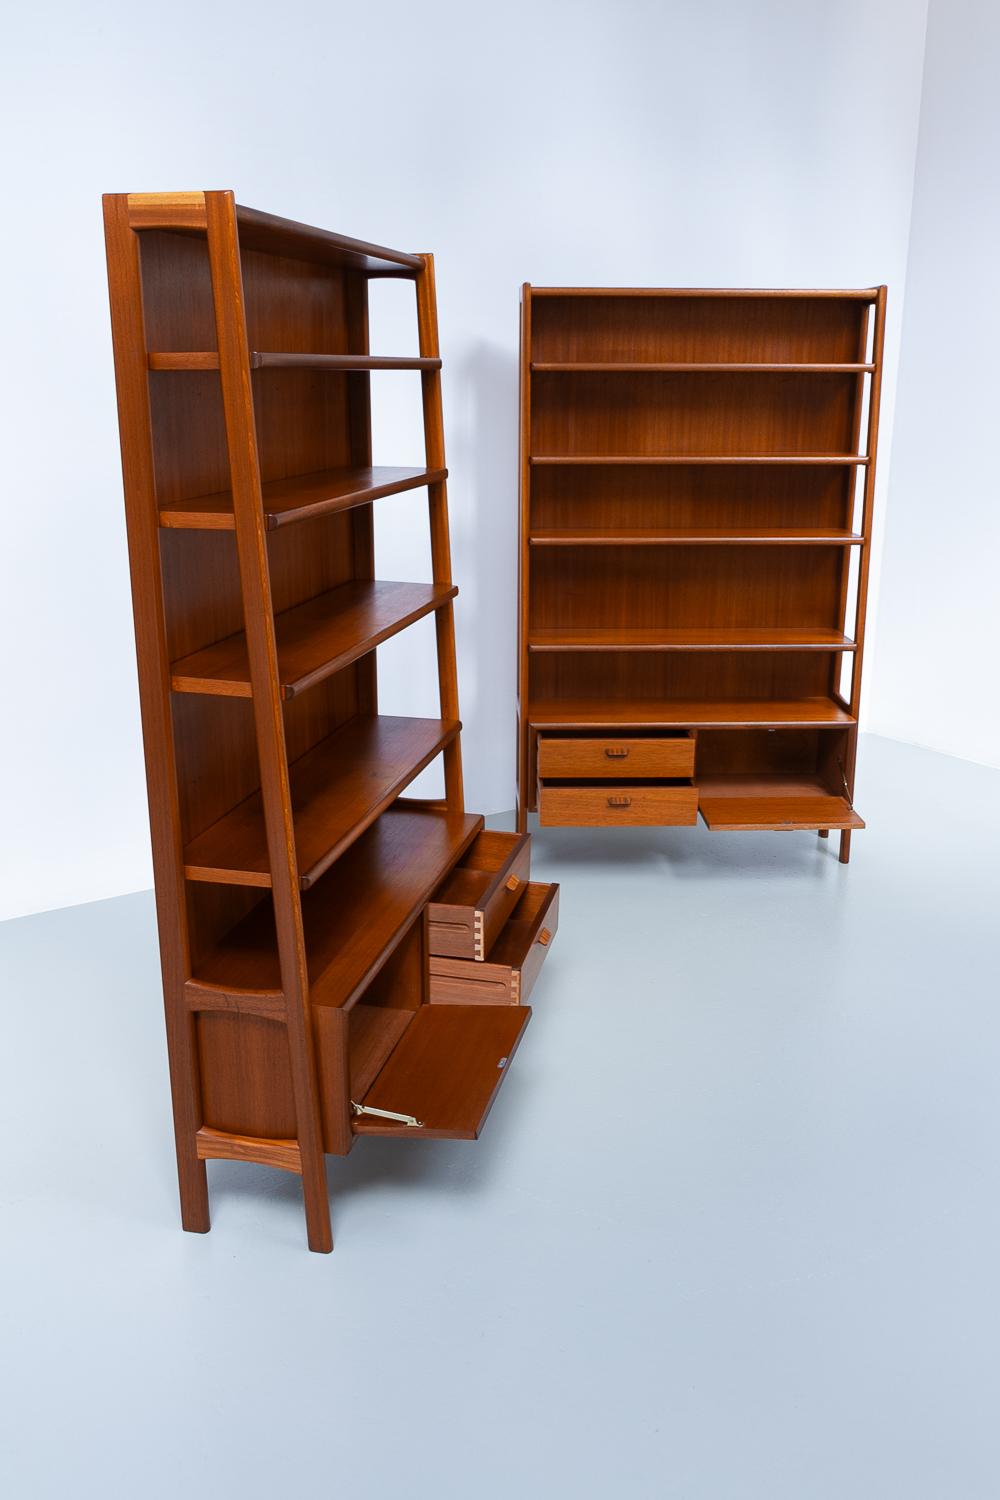 Mid-20th Century Danish Modern Mahogany Bookcases, 1960s. Set of 2. For Sale